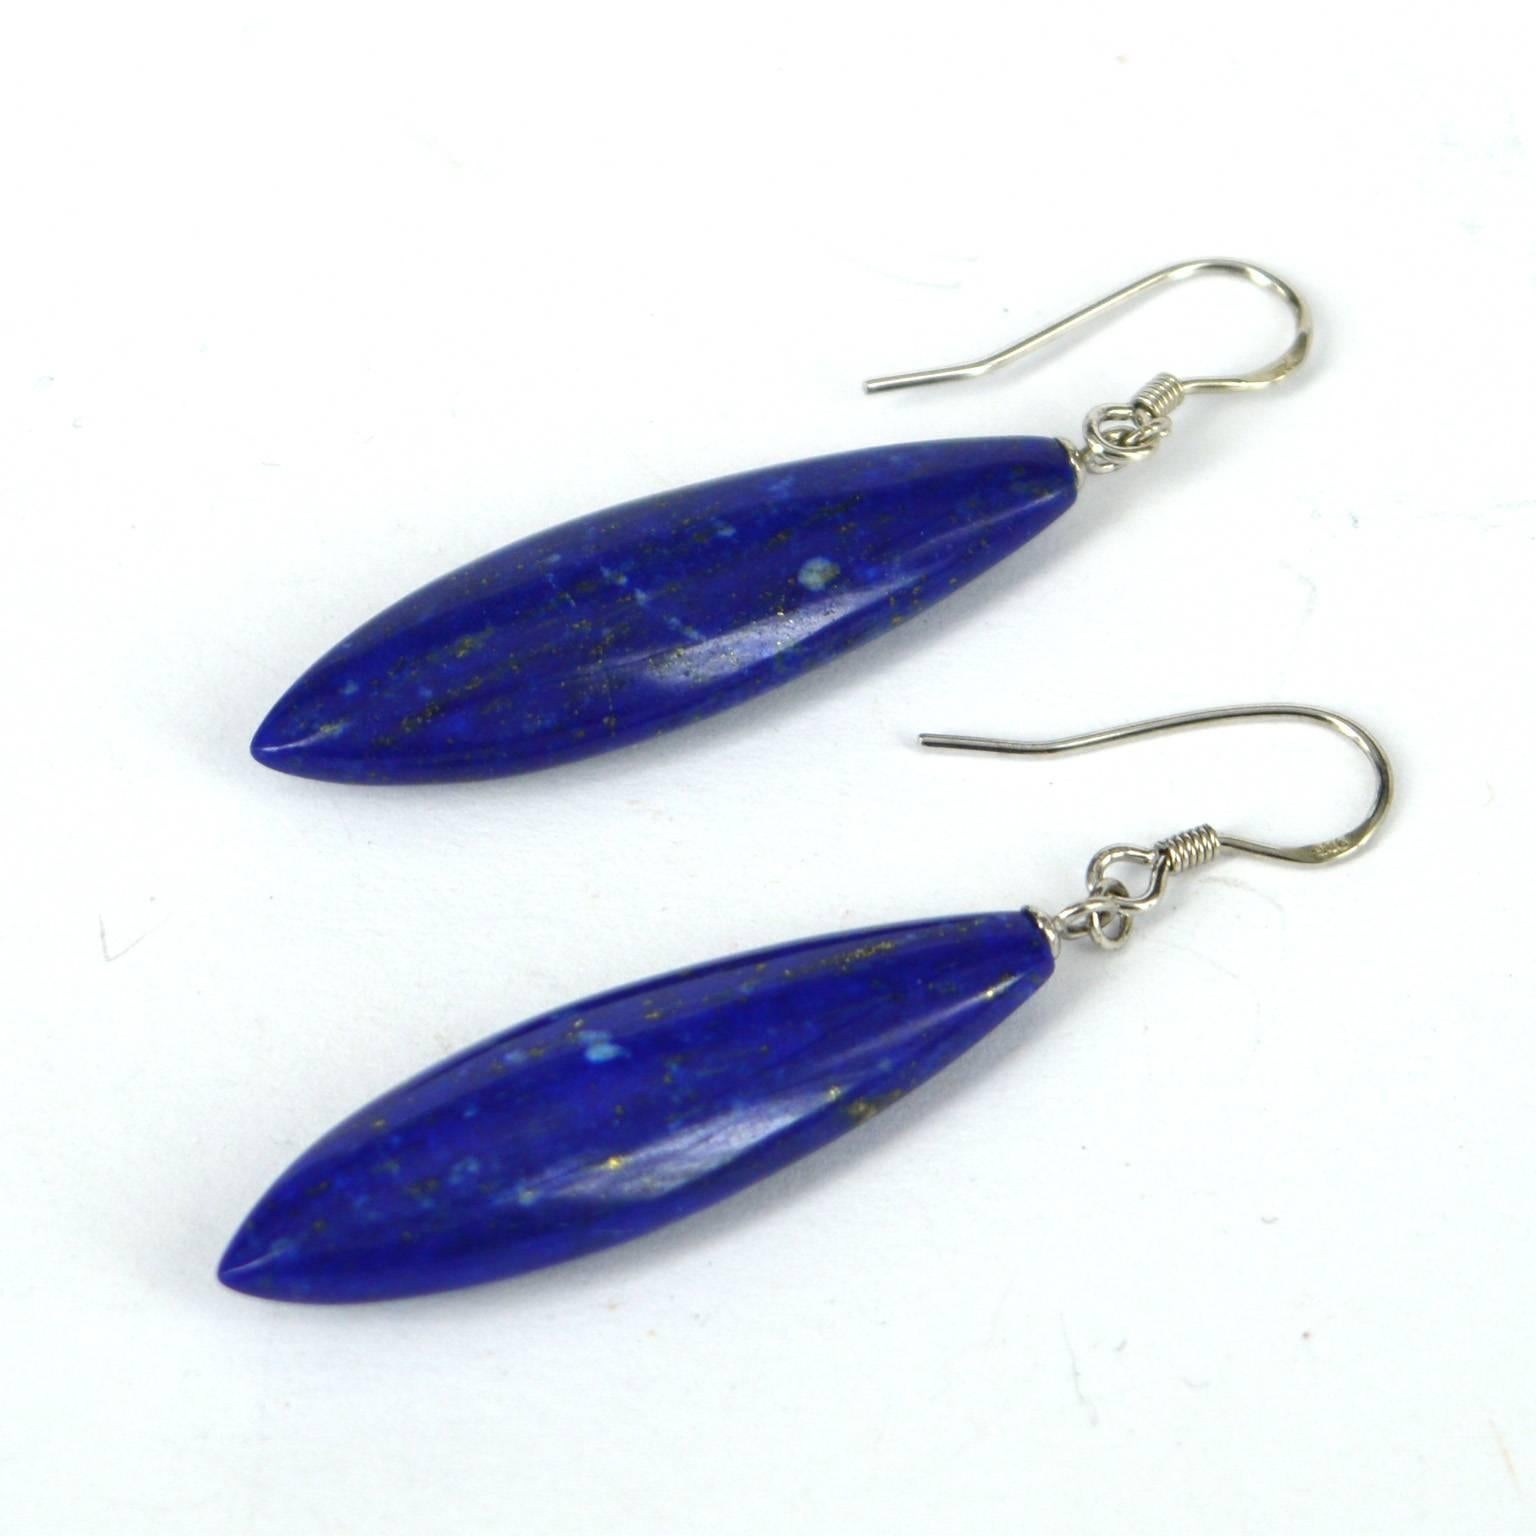 Polished Lapis Lazuli in a marquise shape. Sterling Silver Rhodium plate hooks and findings.
52mm long drop. 10mm x 35mm bead.